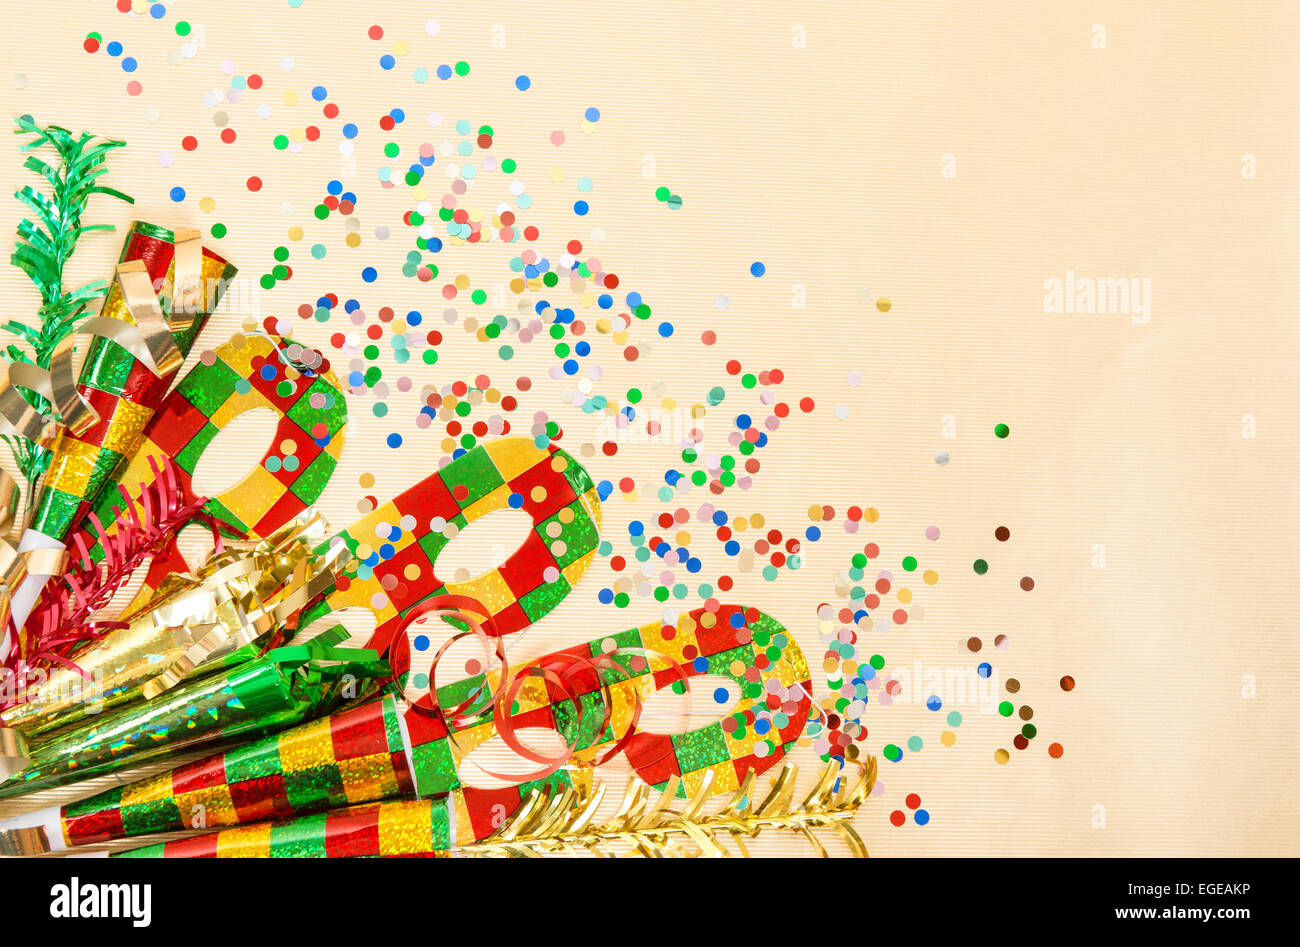 Carnival mask, confetti, streamer. Holidays decorations over golden background Stock Photo